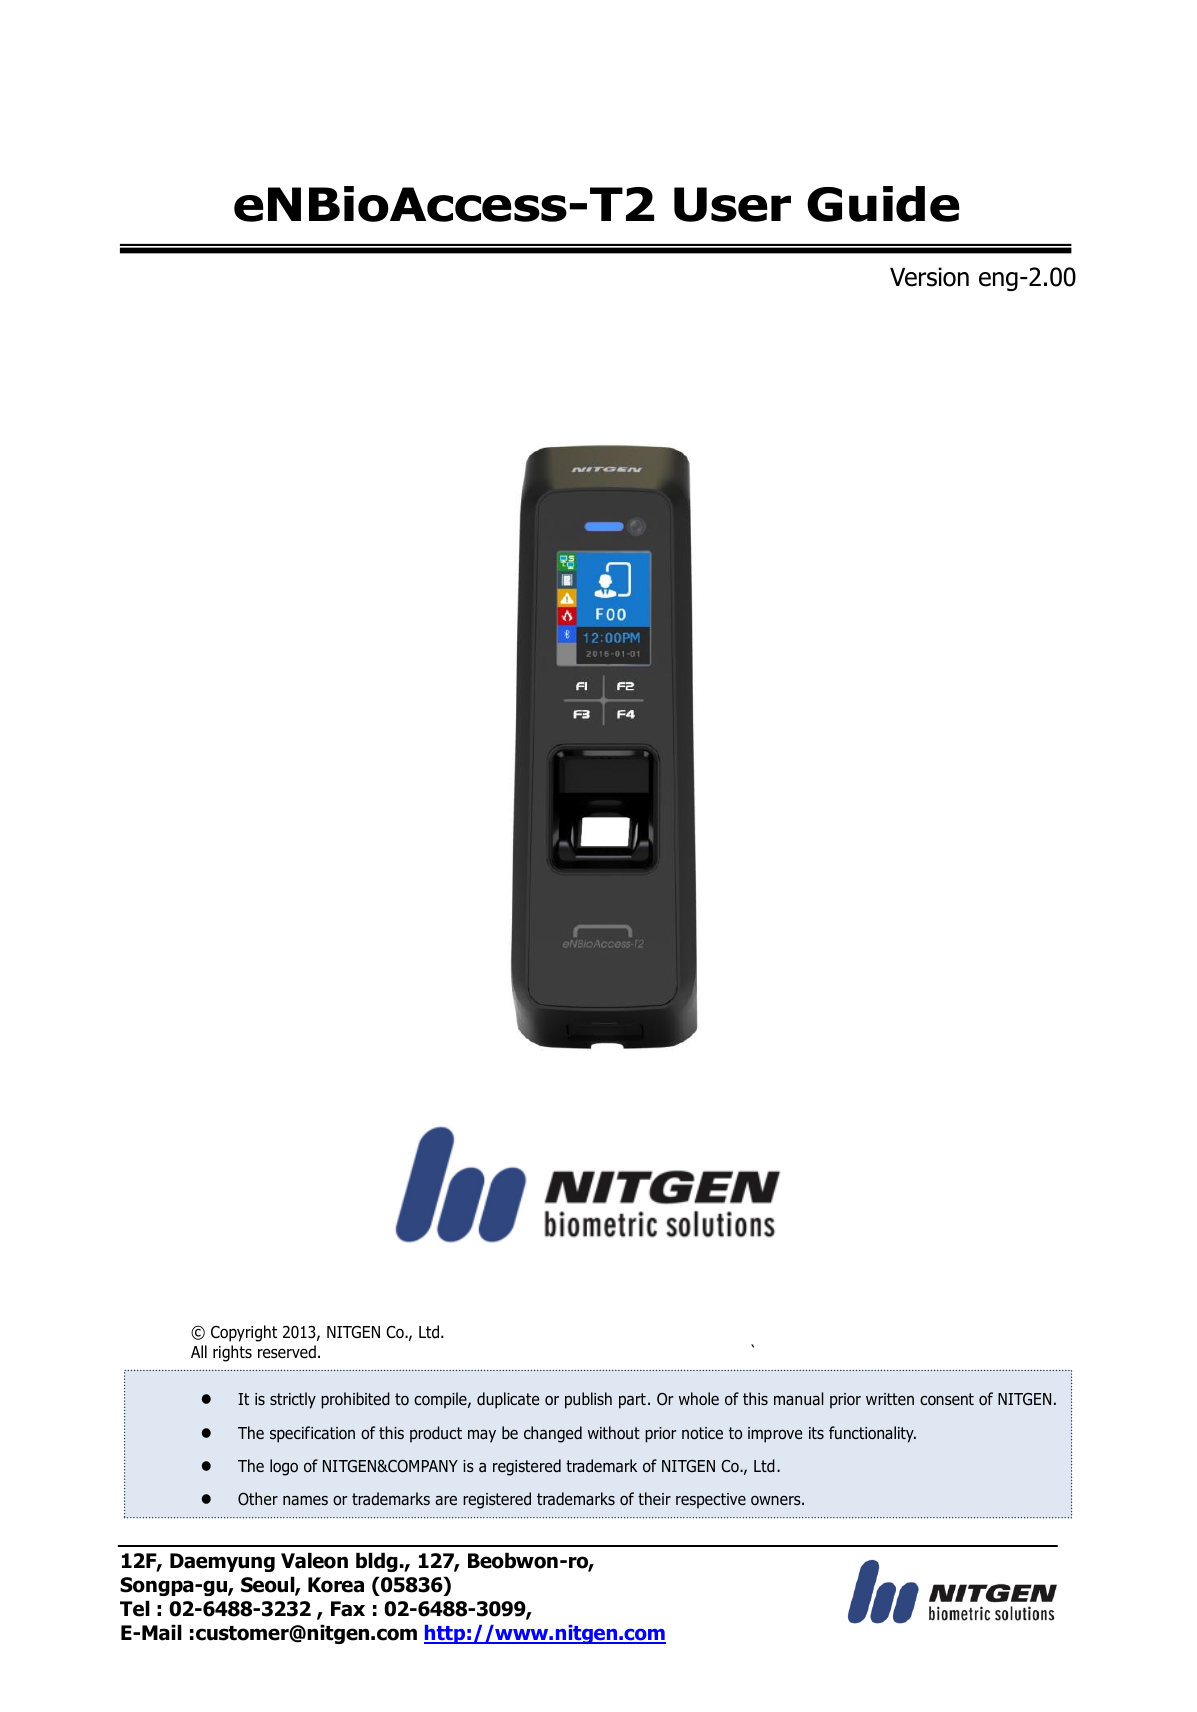 12F, Daemyung Valeon bldg., 127, Beobwon-ro, Songpa-gu, Seoul, Korea (05836) Tel : 02-6488-3232 , Fax : 02-6488-3099,   E-Mail :customer@nitgen.com http://www.nitgen.com  eNBioAccess-T2 User Guide  Version eng-2.00                          ©  Copyright 2013, NITGEN Co., Ltd. All rights reserved.  `   It is strictly prohibited to compile, duplicate or publish part. Or whole of this manual prior written consent of NITGEN.  The specification of this product may be changed without prior notice to improve its functionality.  The logo of NITGEN&amp;COMPANY is a registered trademark of NITGEN Co., Ltd.  Other names or trademarks are registered trademarks of their respective owners. 